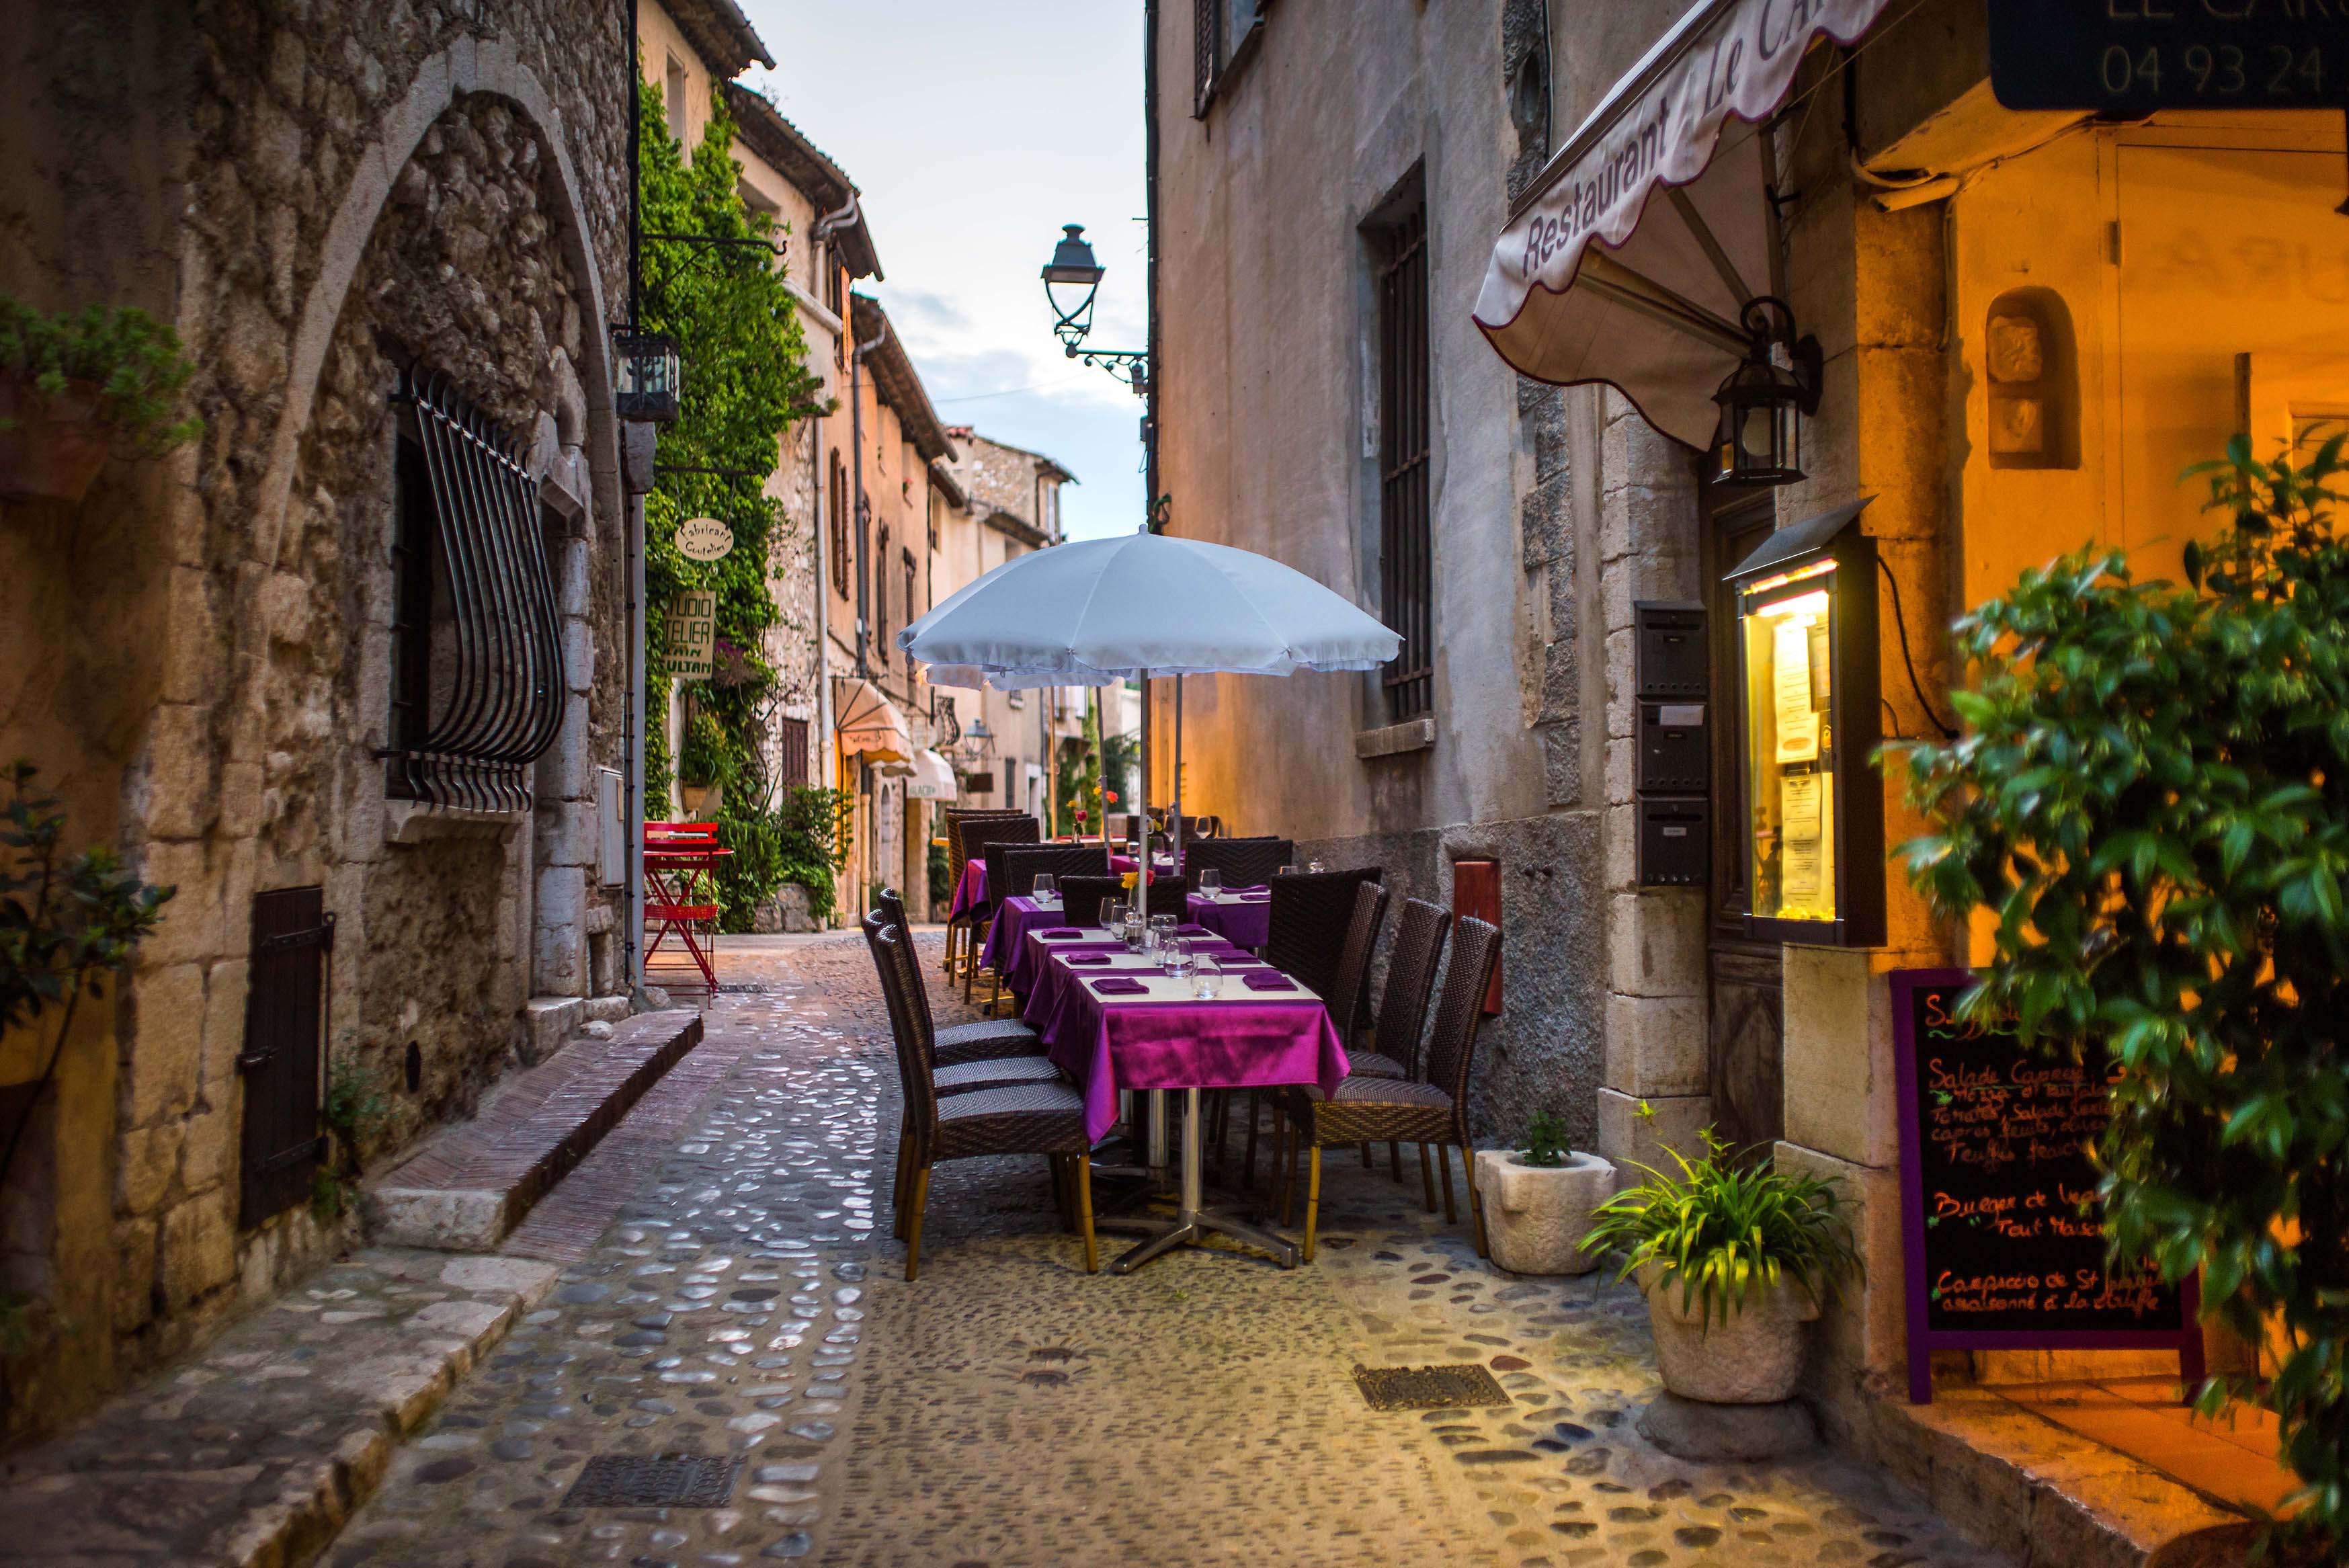 A restaurant in the evening at the old streets of Saint Paul de Vence, France. Image: Shutterstock.